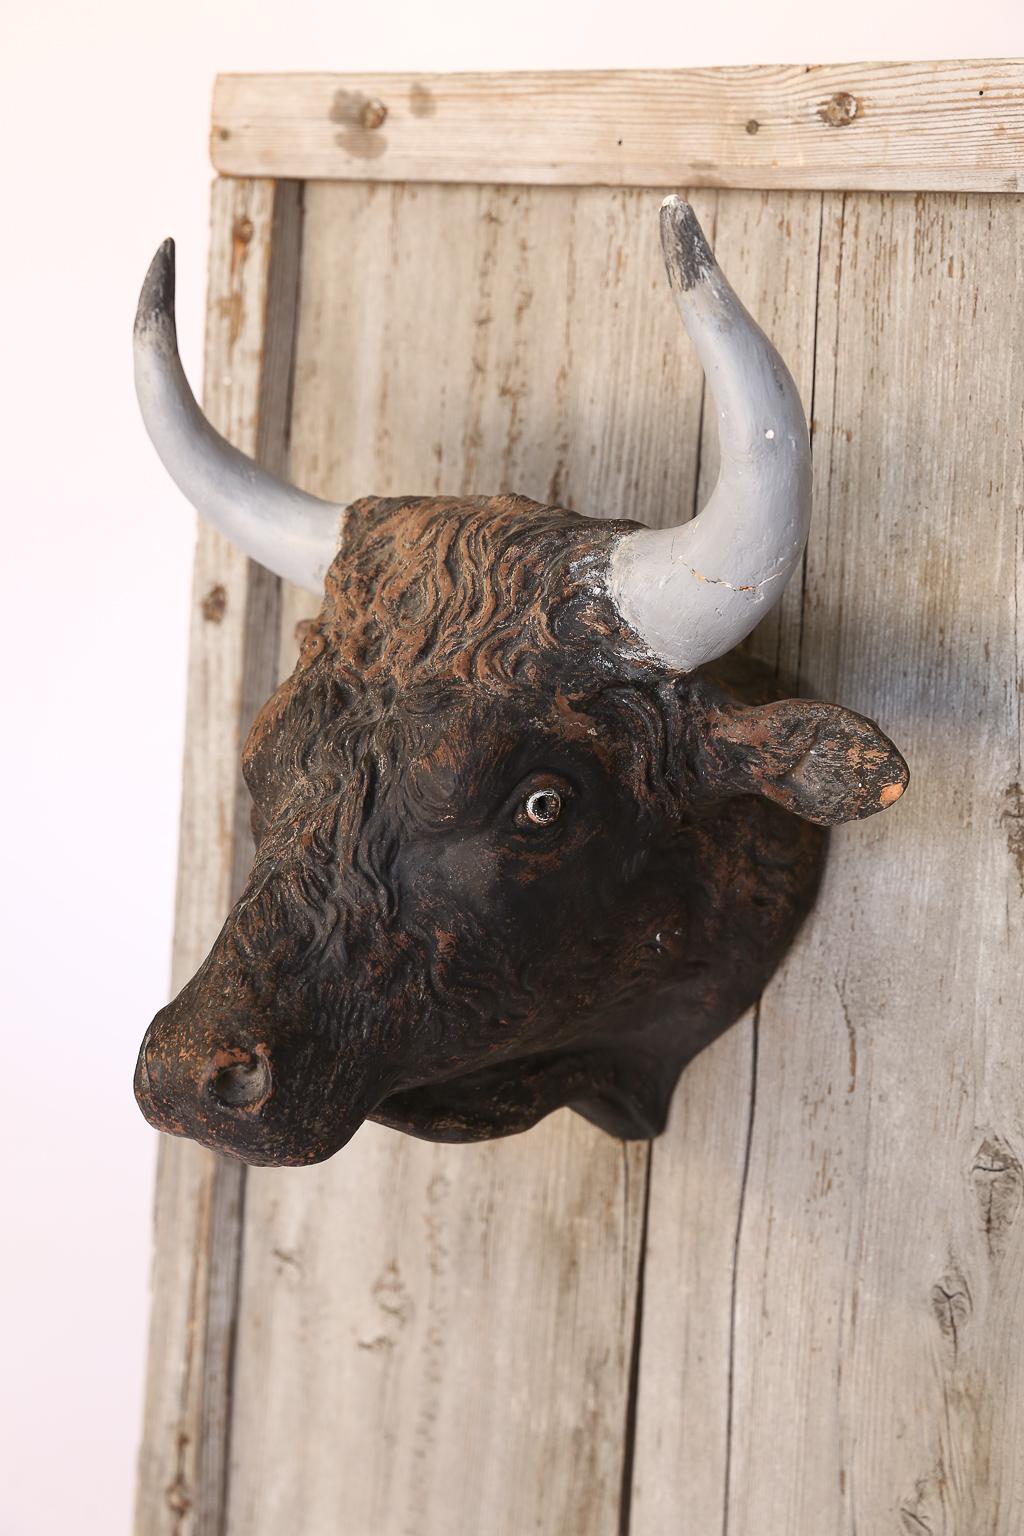 Presented as found, this antique French terracotta bull head was once used as a trade sign for a butcher shop in France. The bull head is attached to the wood by a single screw and is removable allowing it to be hung directly on the wall. The